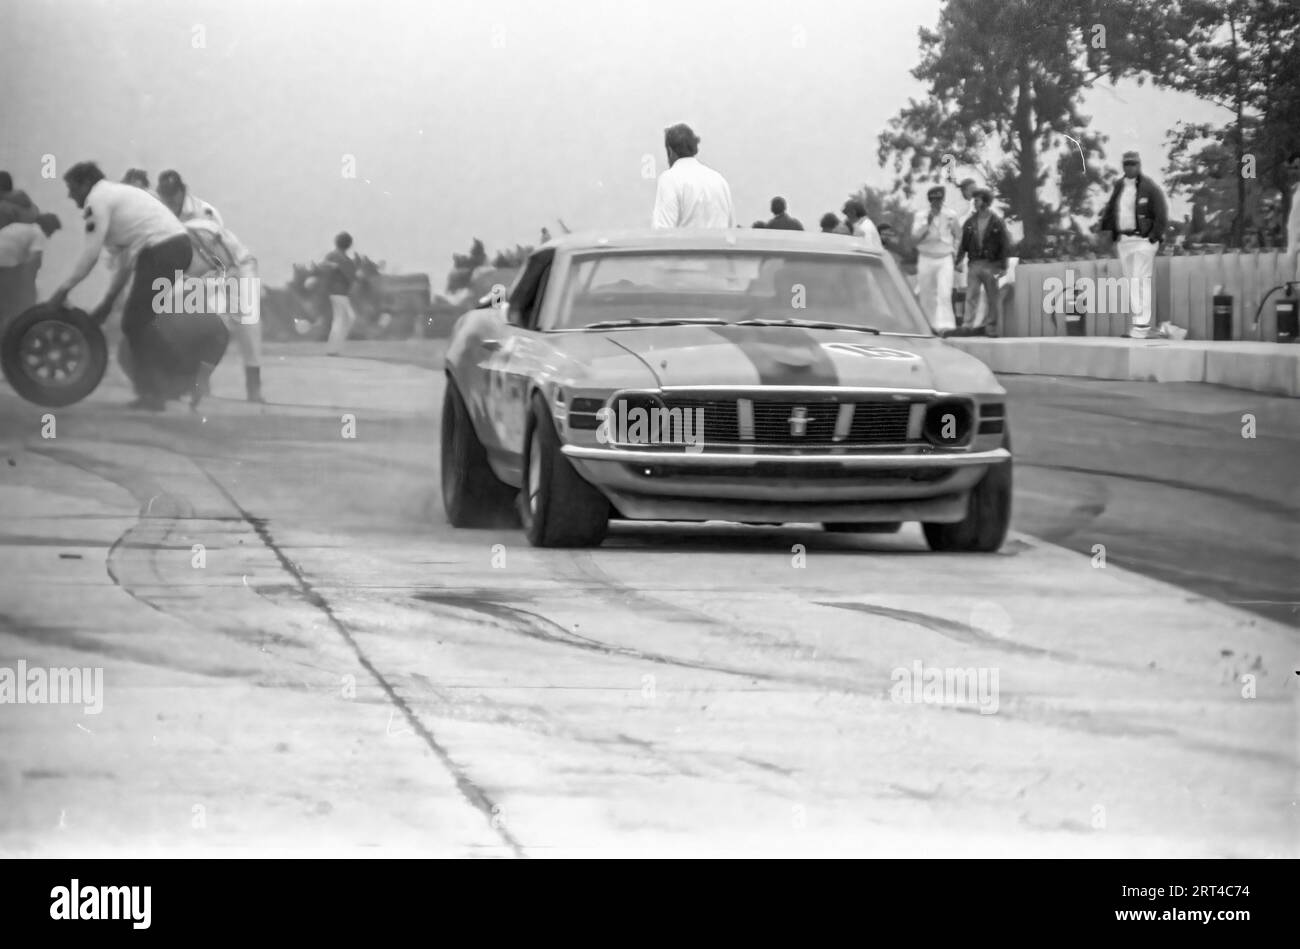 1971 Watkins Glen Trans Am, George Follmer, Bud Moore, Ford Mustang Boss 302, Started 1st  , Finished 2nd Stock Photo